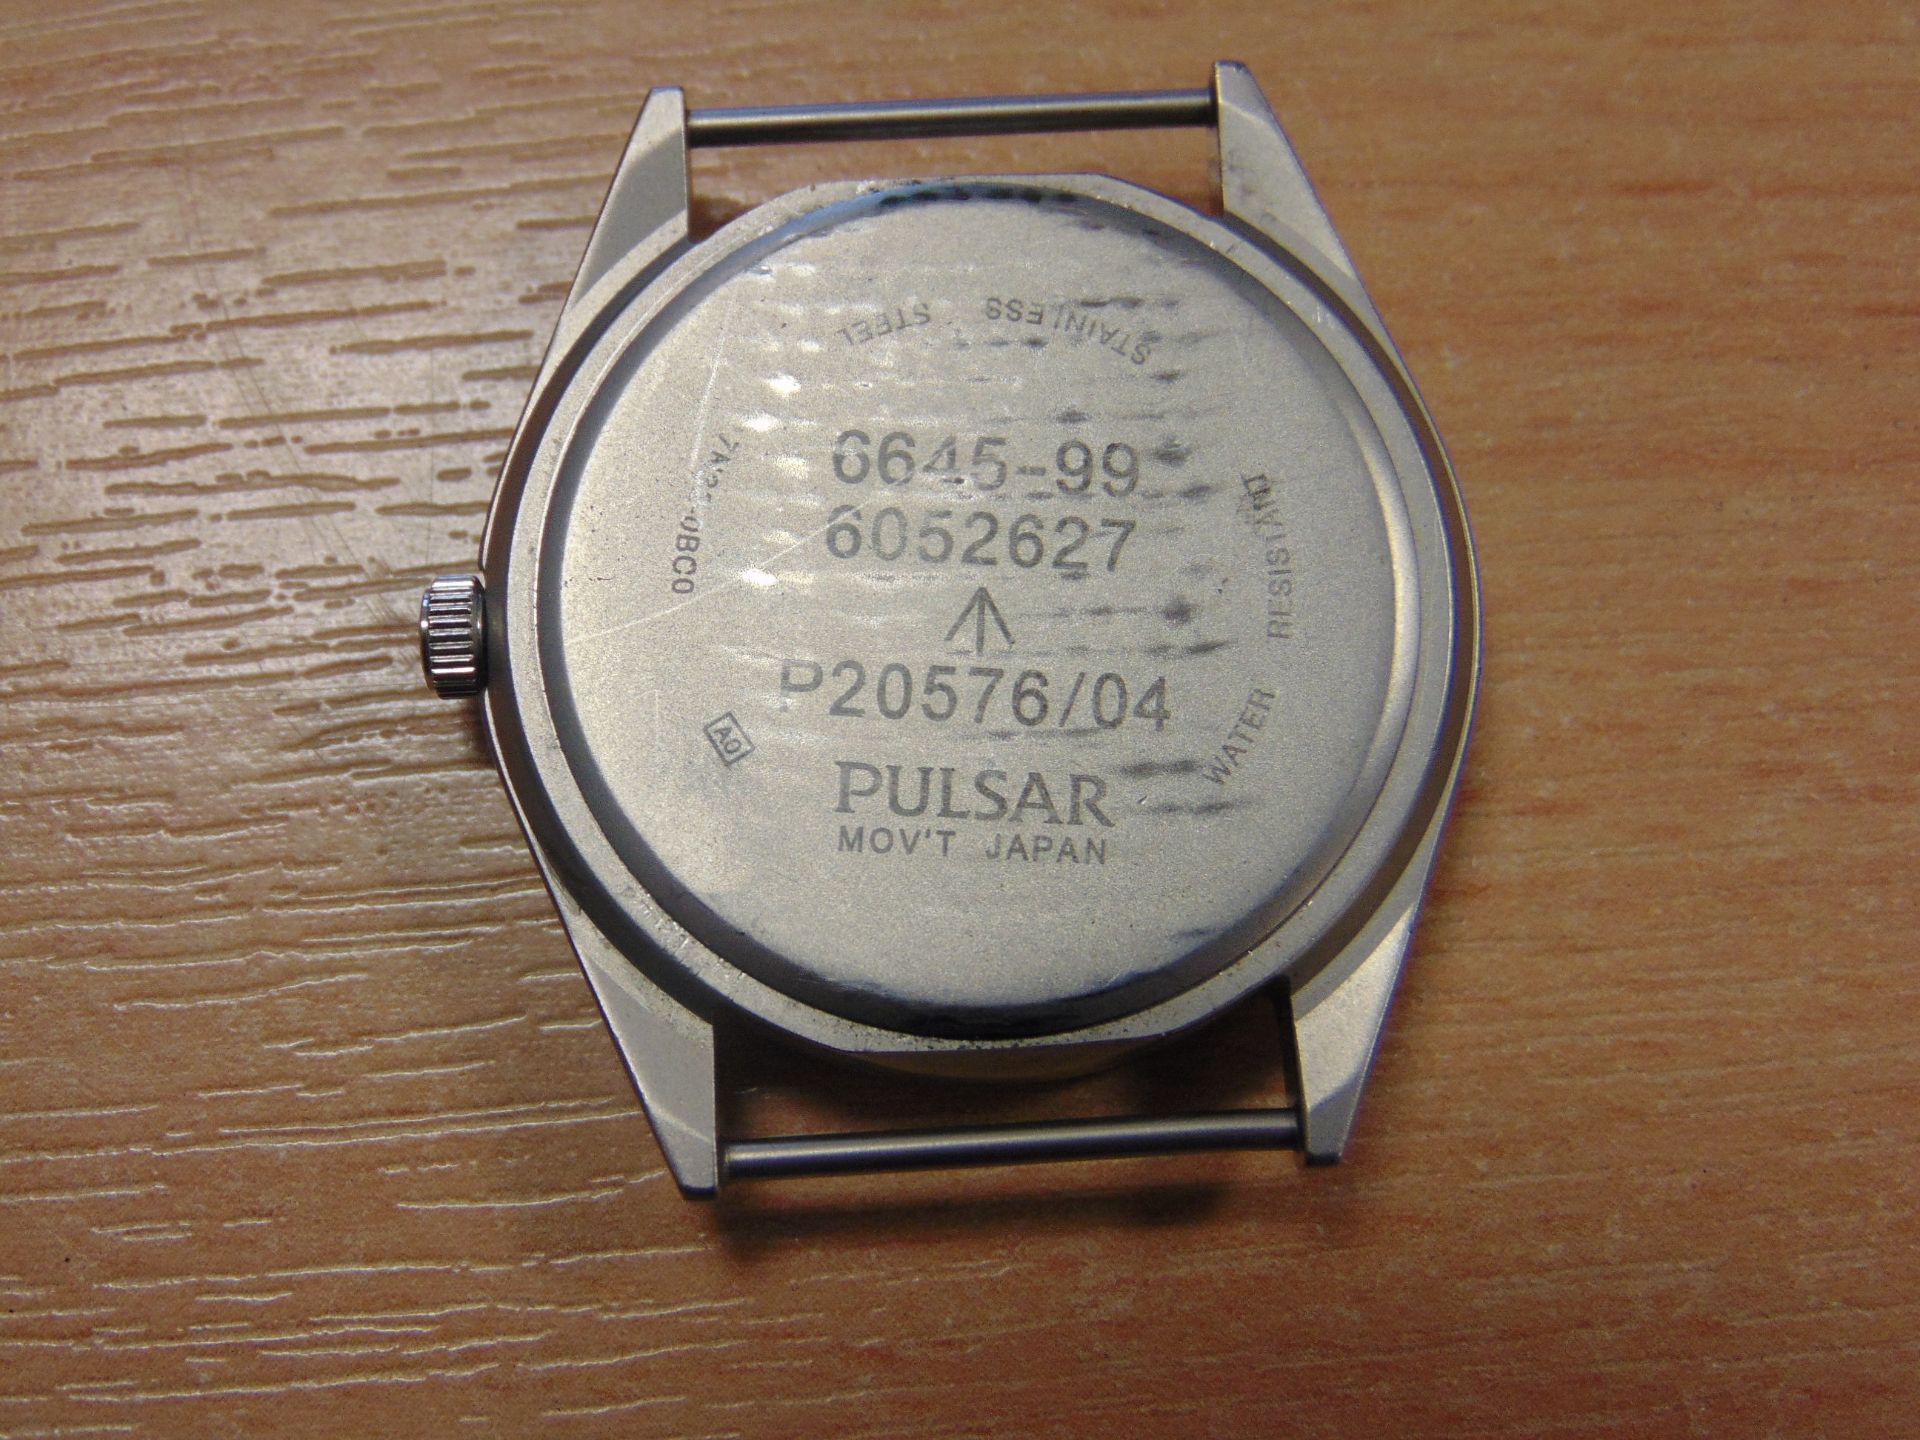 PULSAR W10 BRITISH ISSUE SERVICE WATCH NATO MARKINGS DATED 2004 - Image 9 of 12